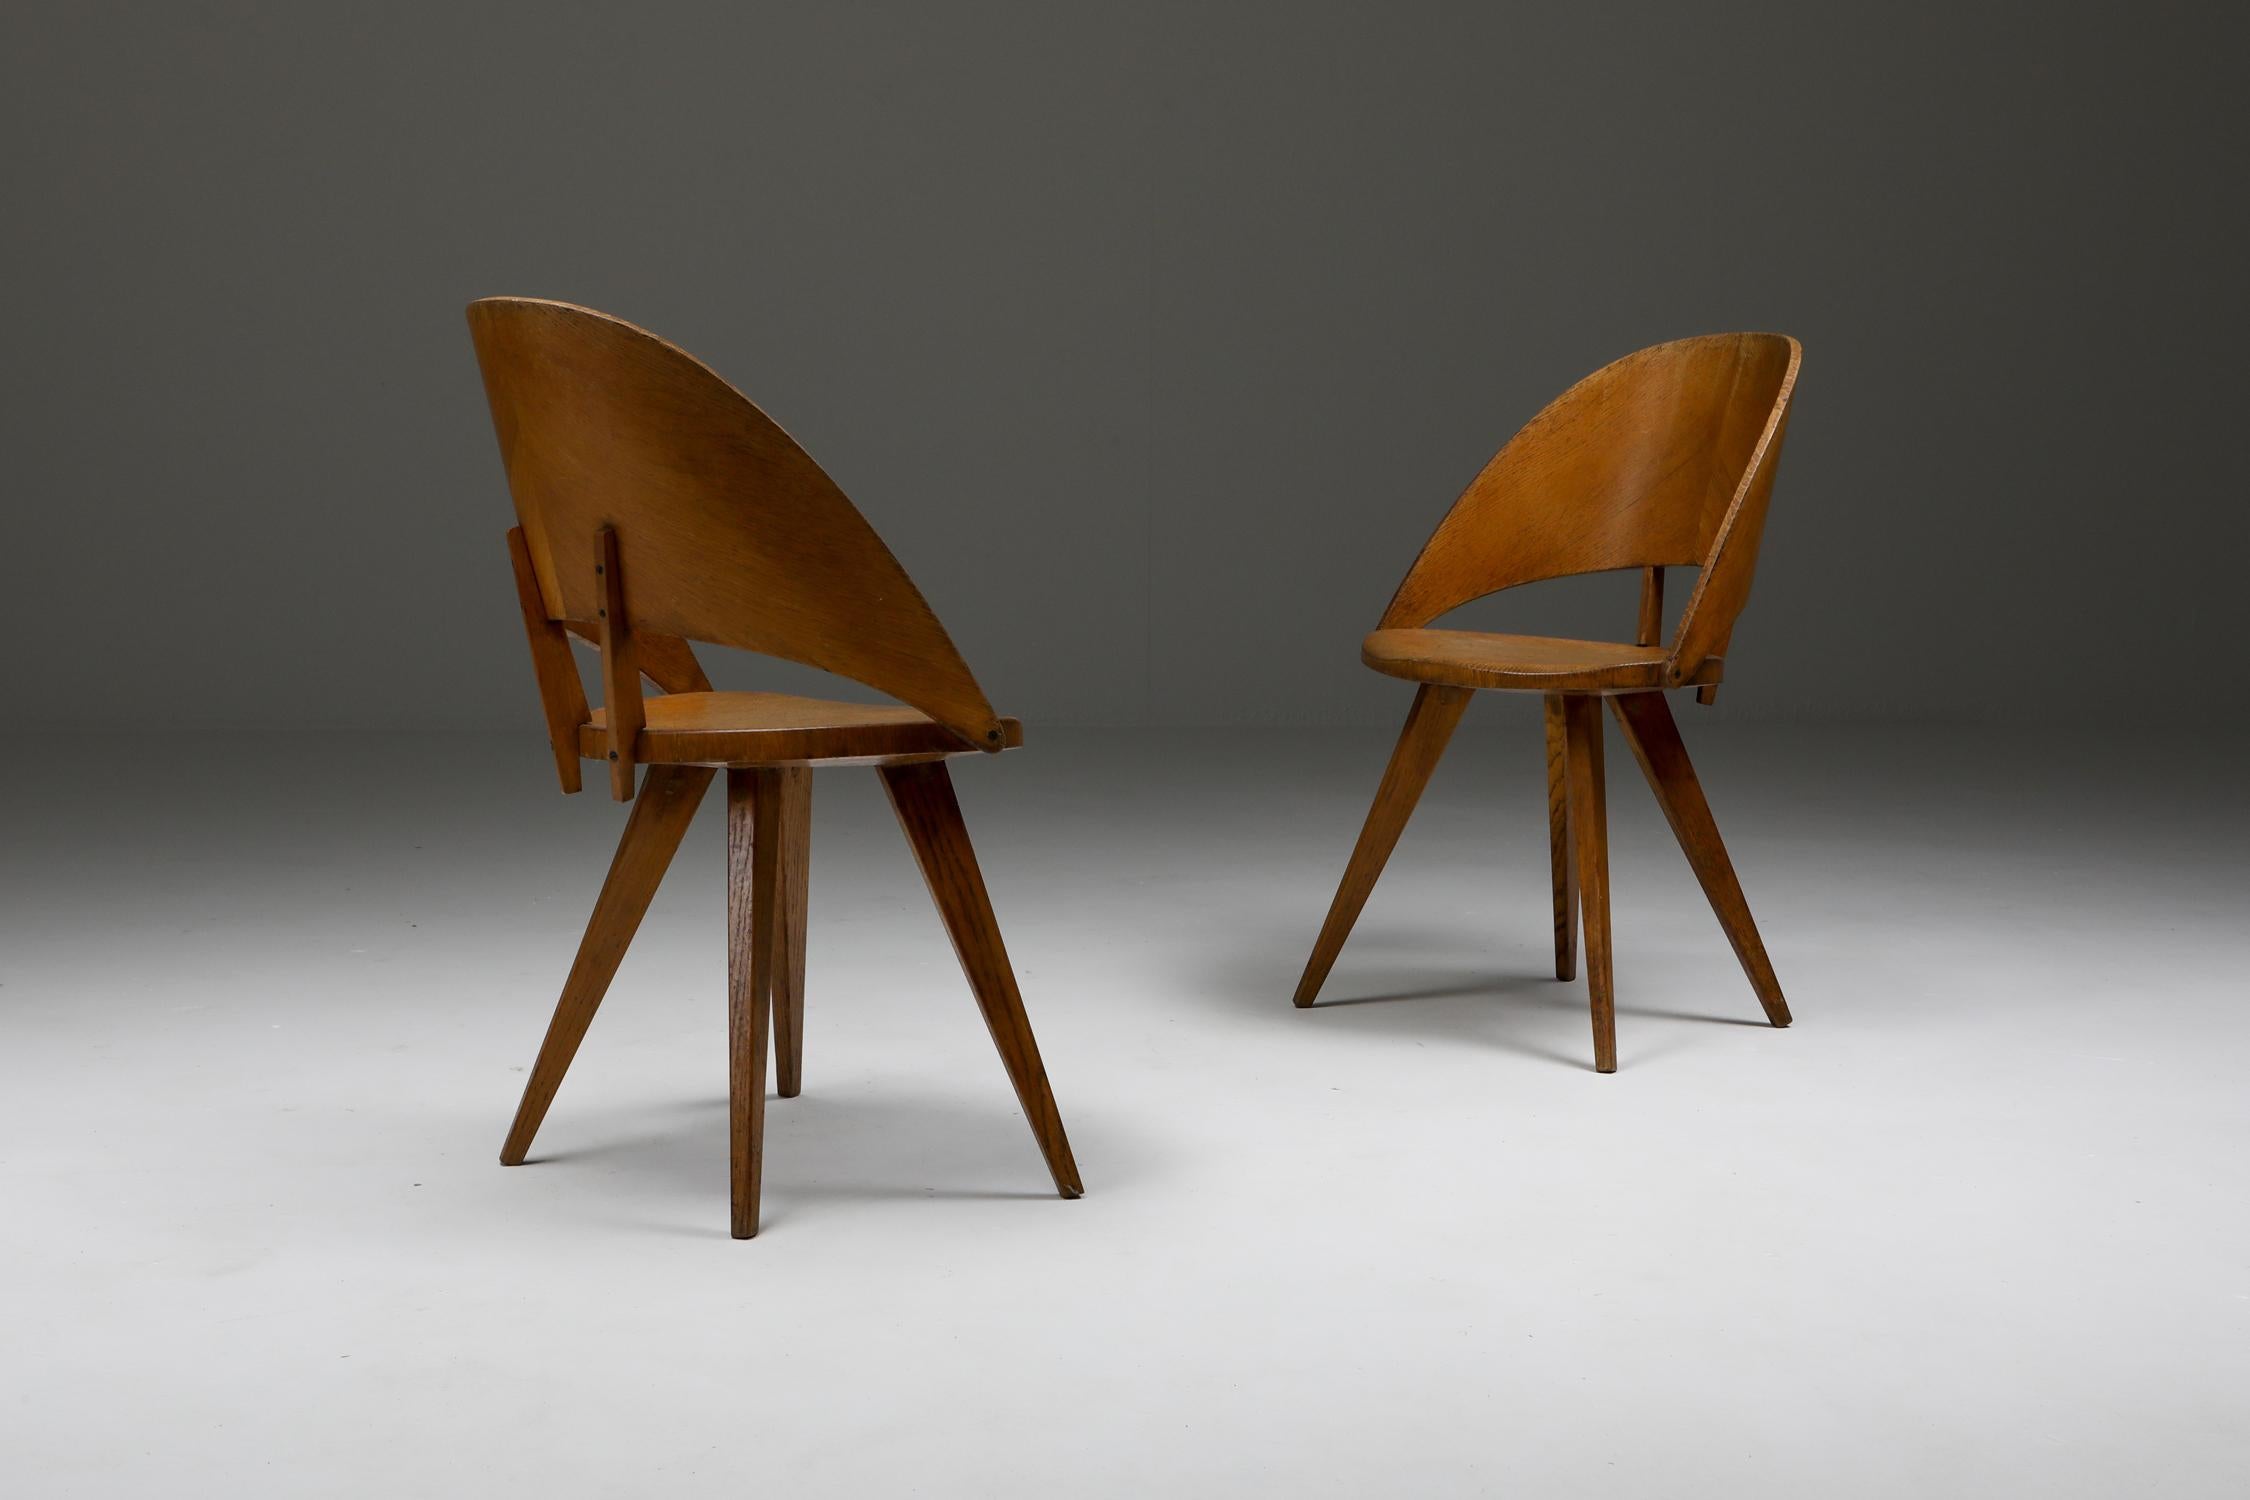 Italian Plywood Dining Chairs, 1940s For Sale 3